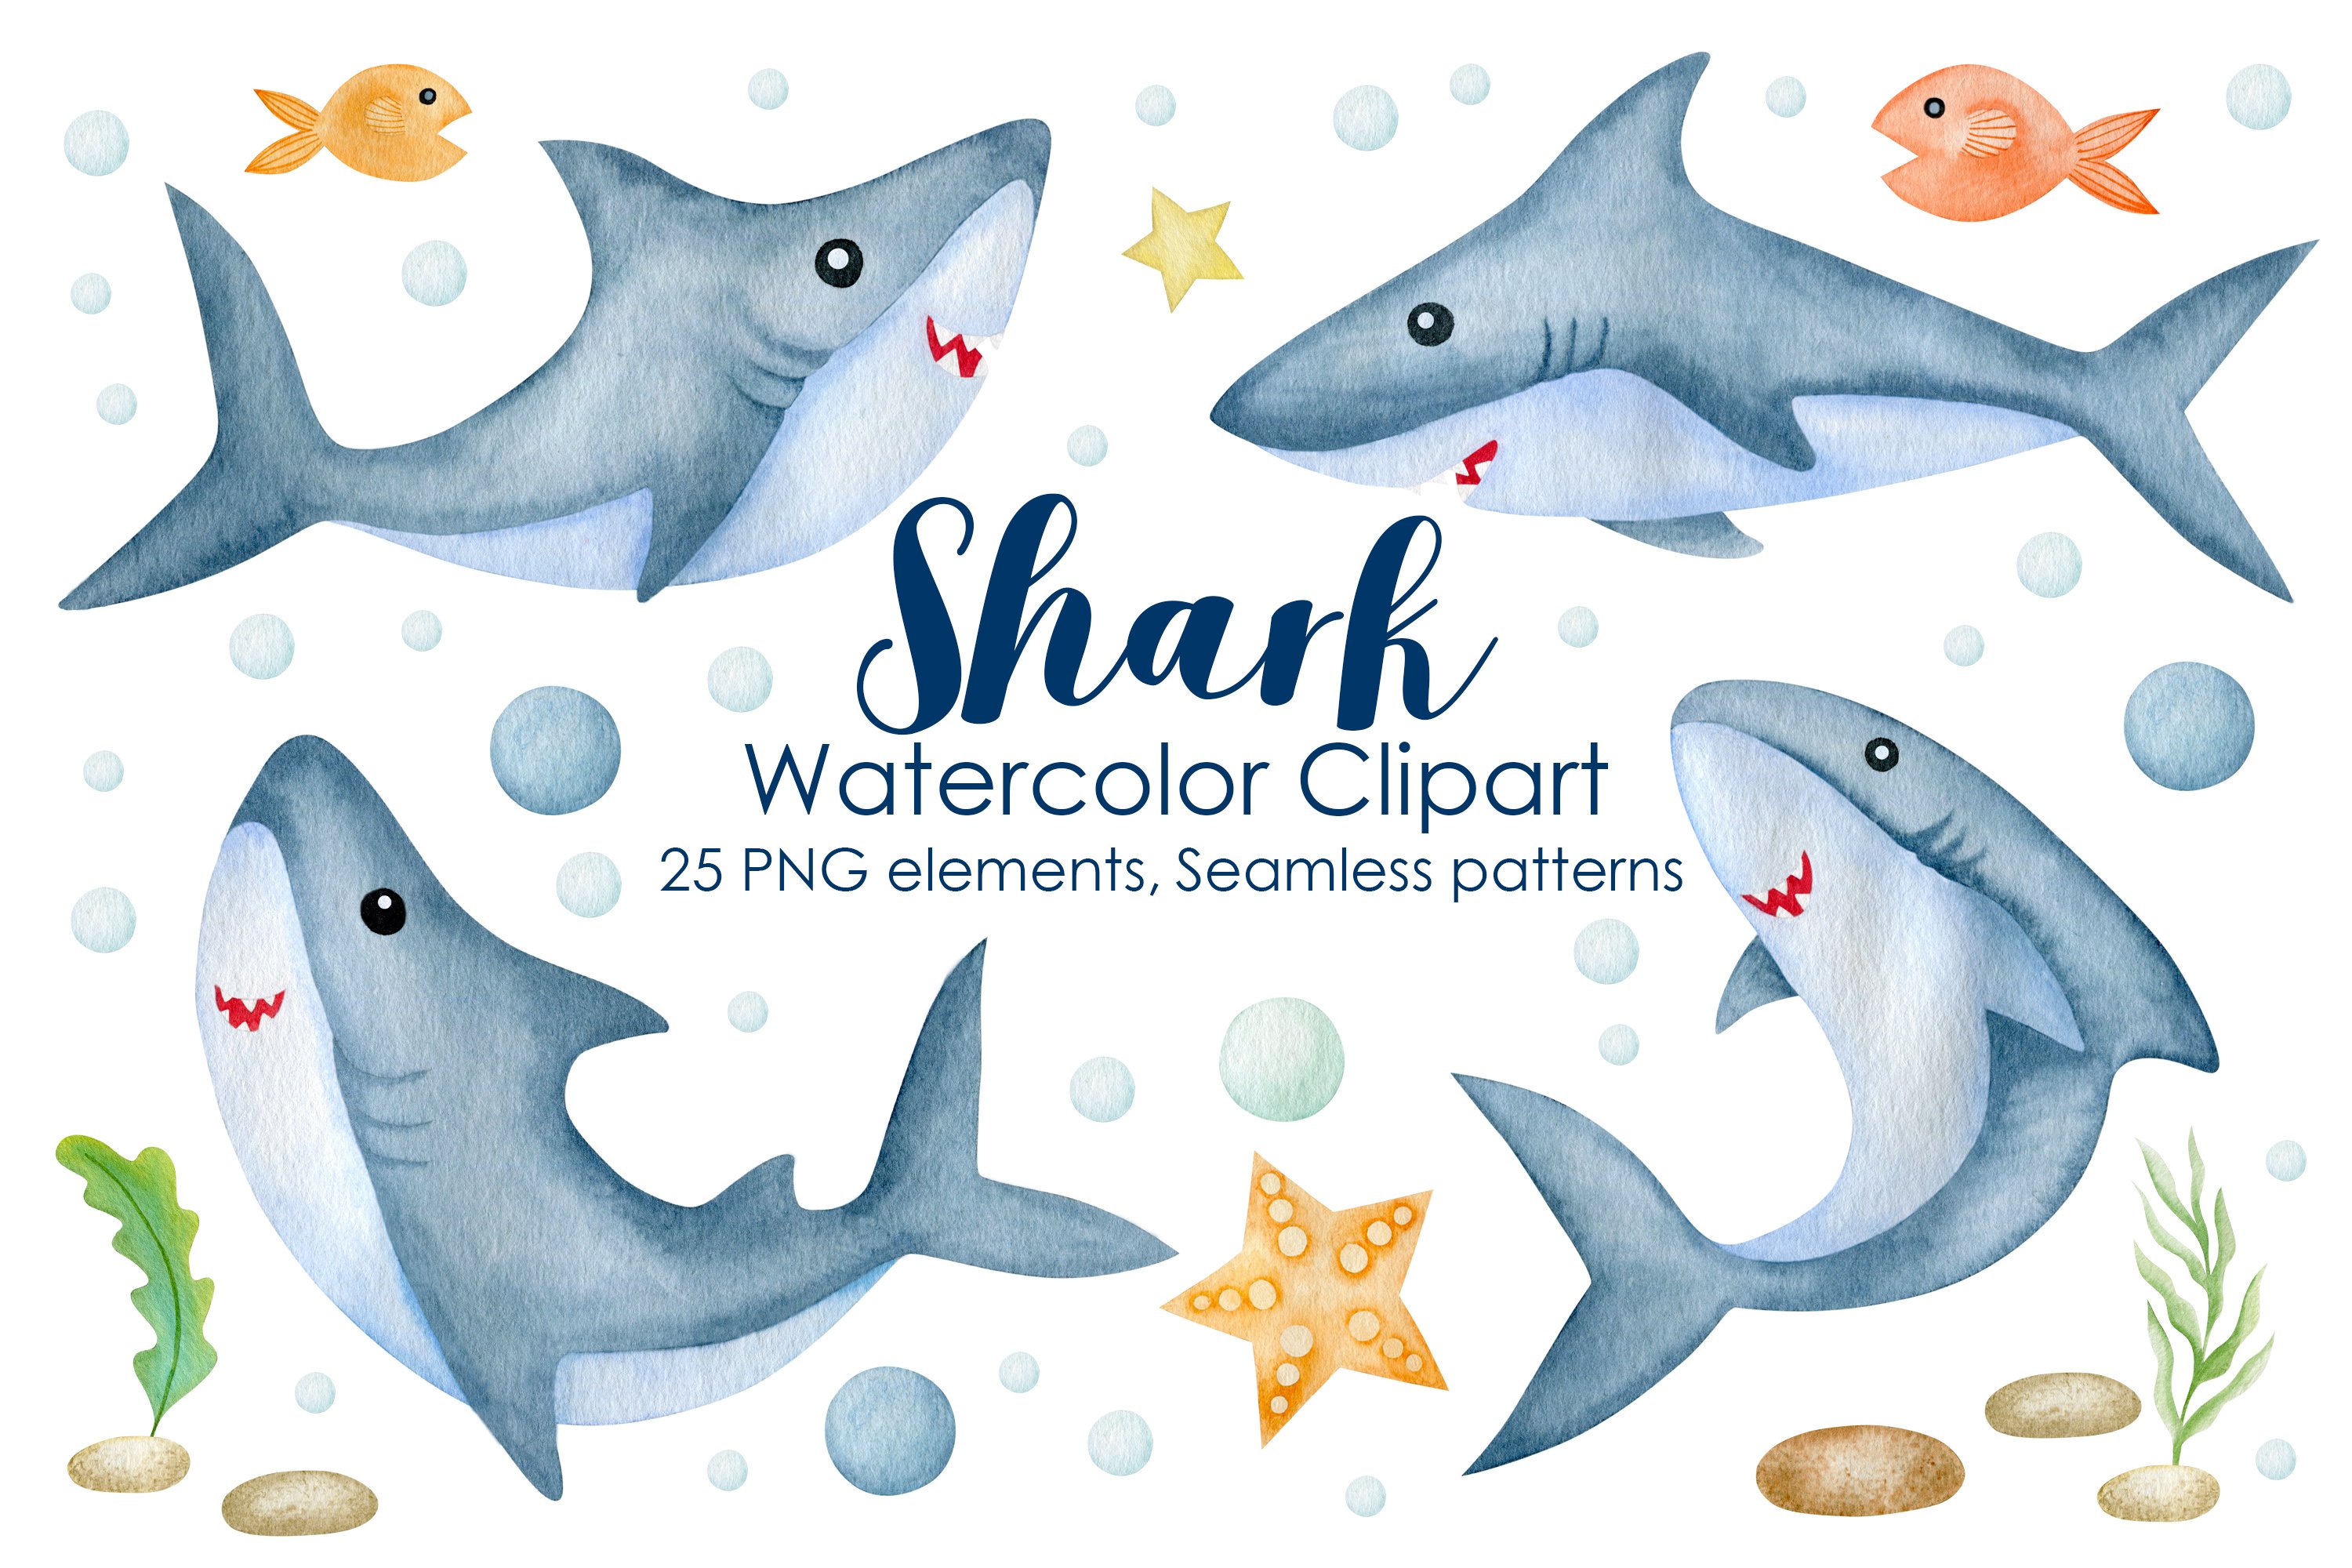 Cute watercolor shark collection.